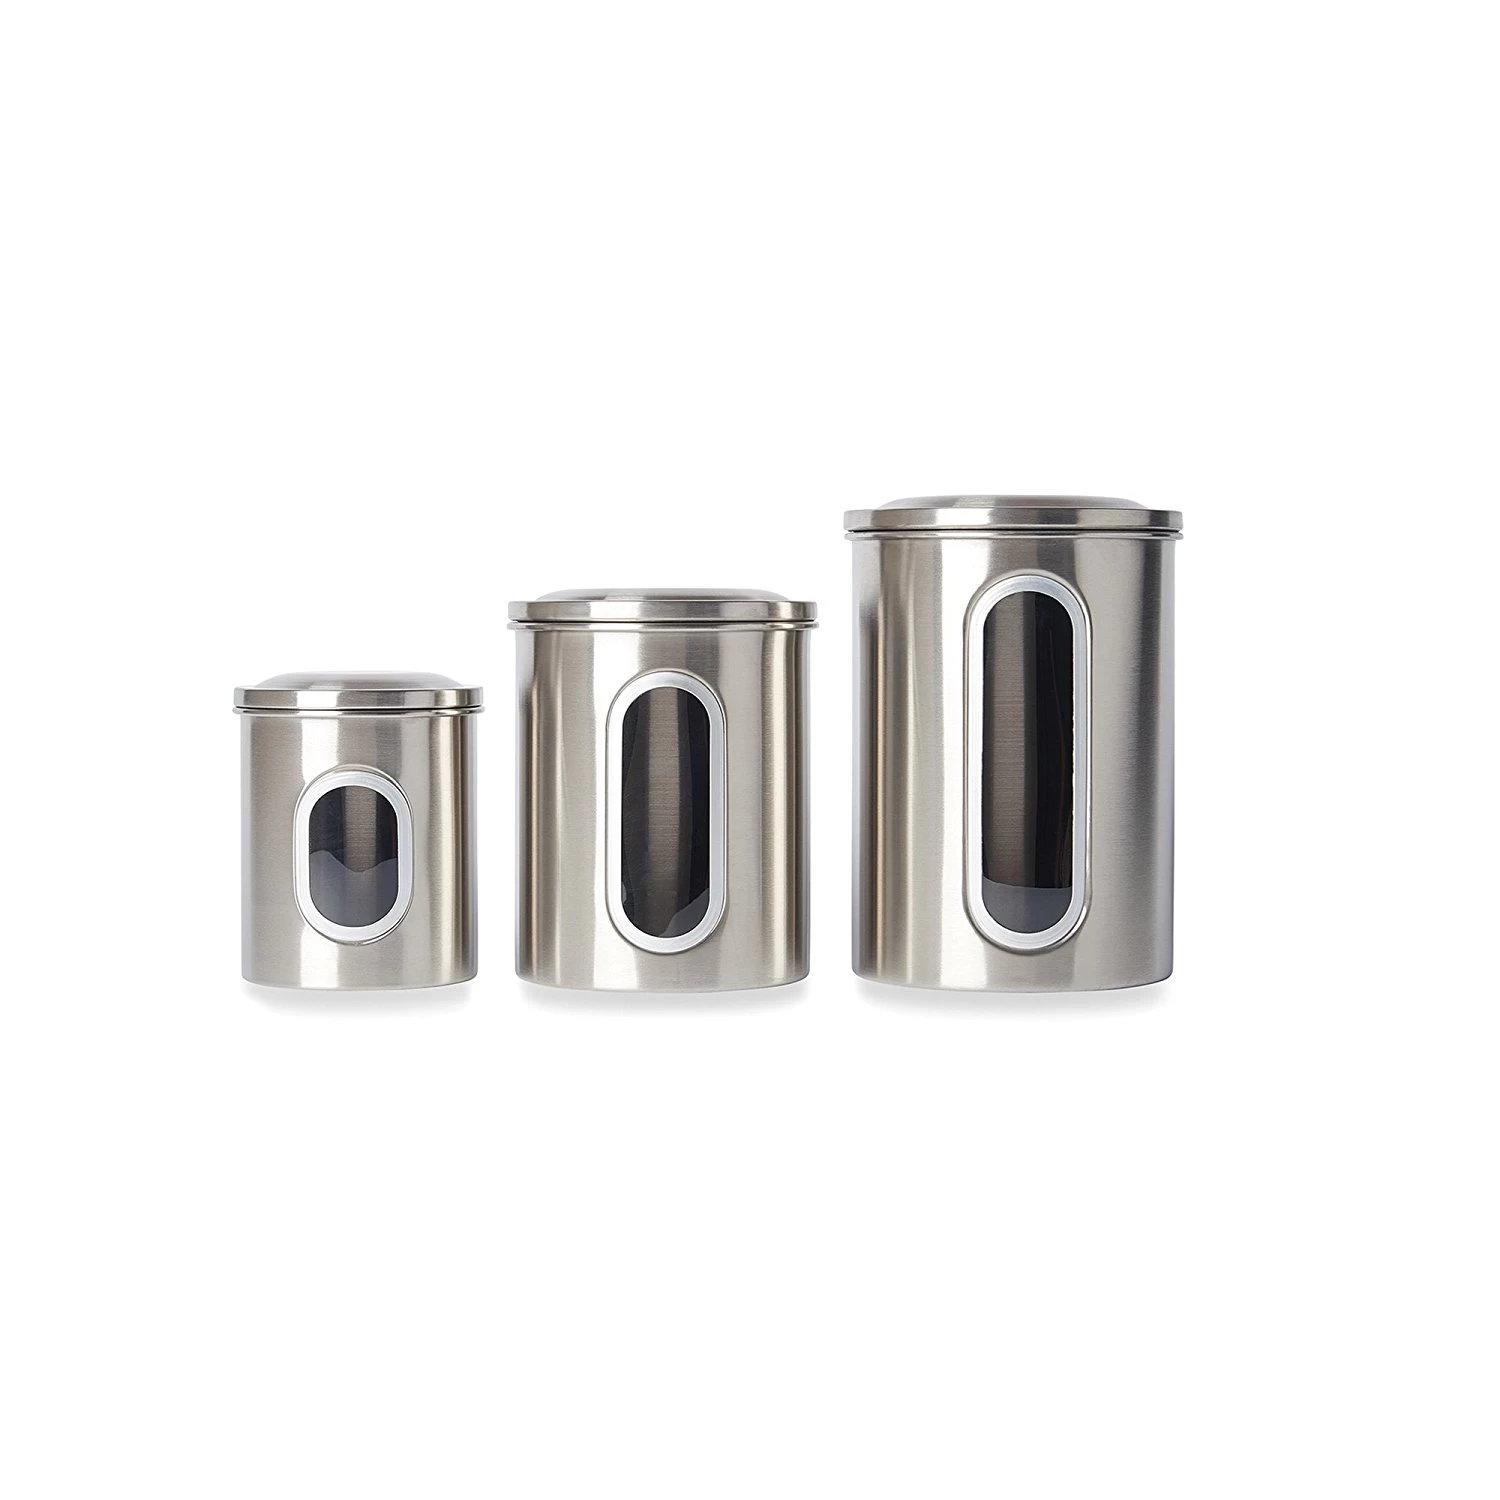 High Quality Stainless Steel Food Storage Canister Set with Removable Air-Tight Lids